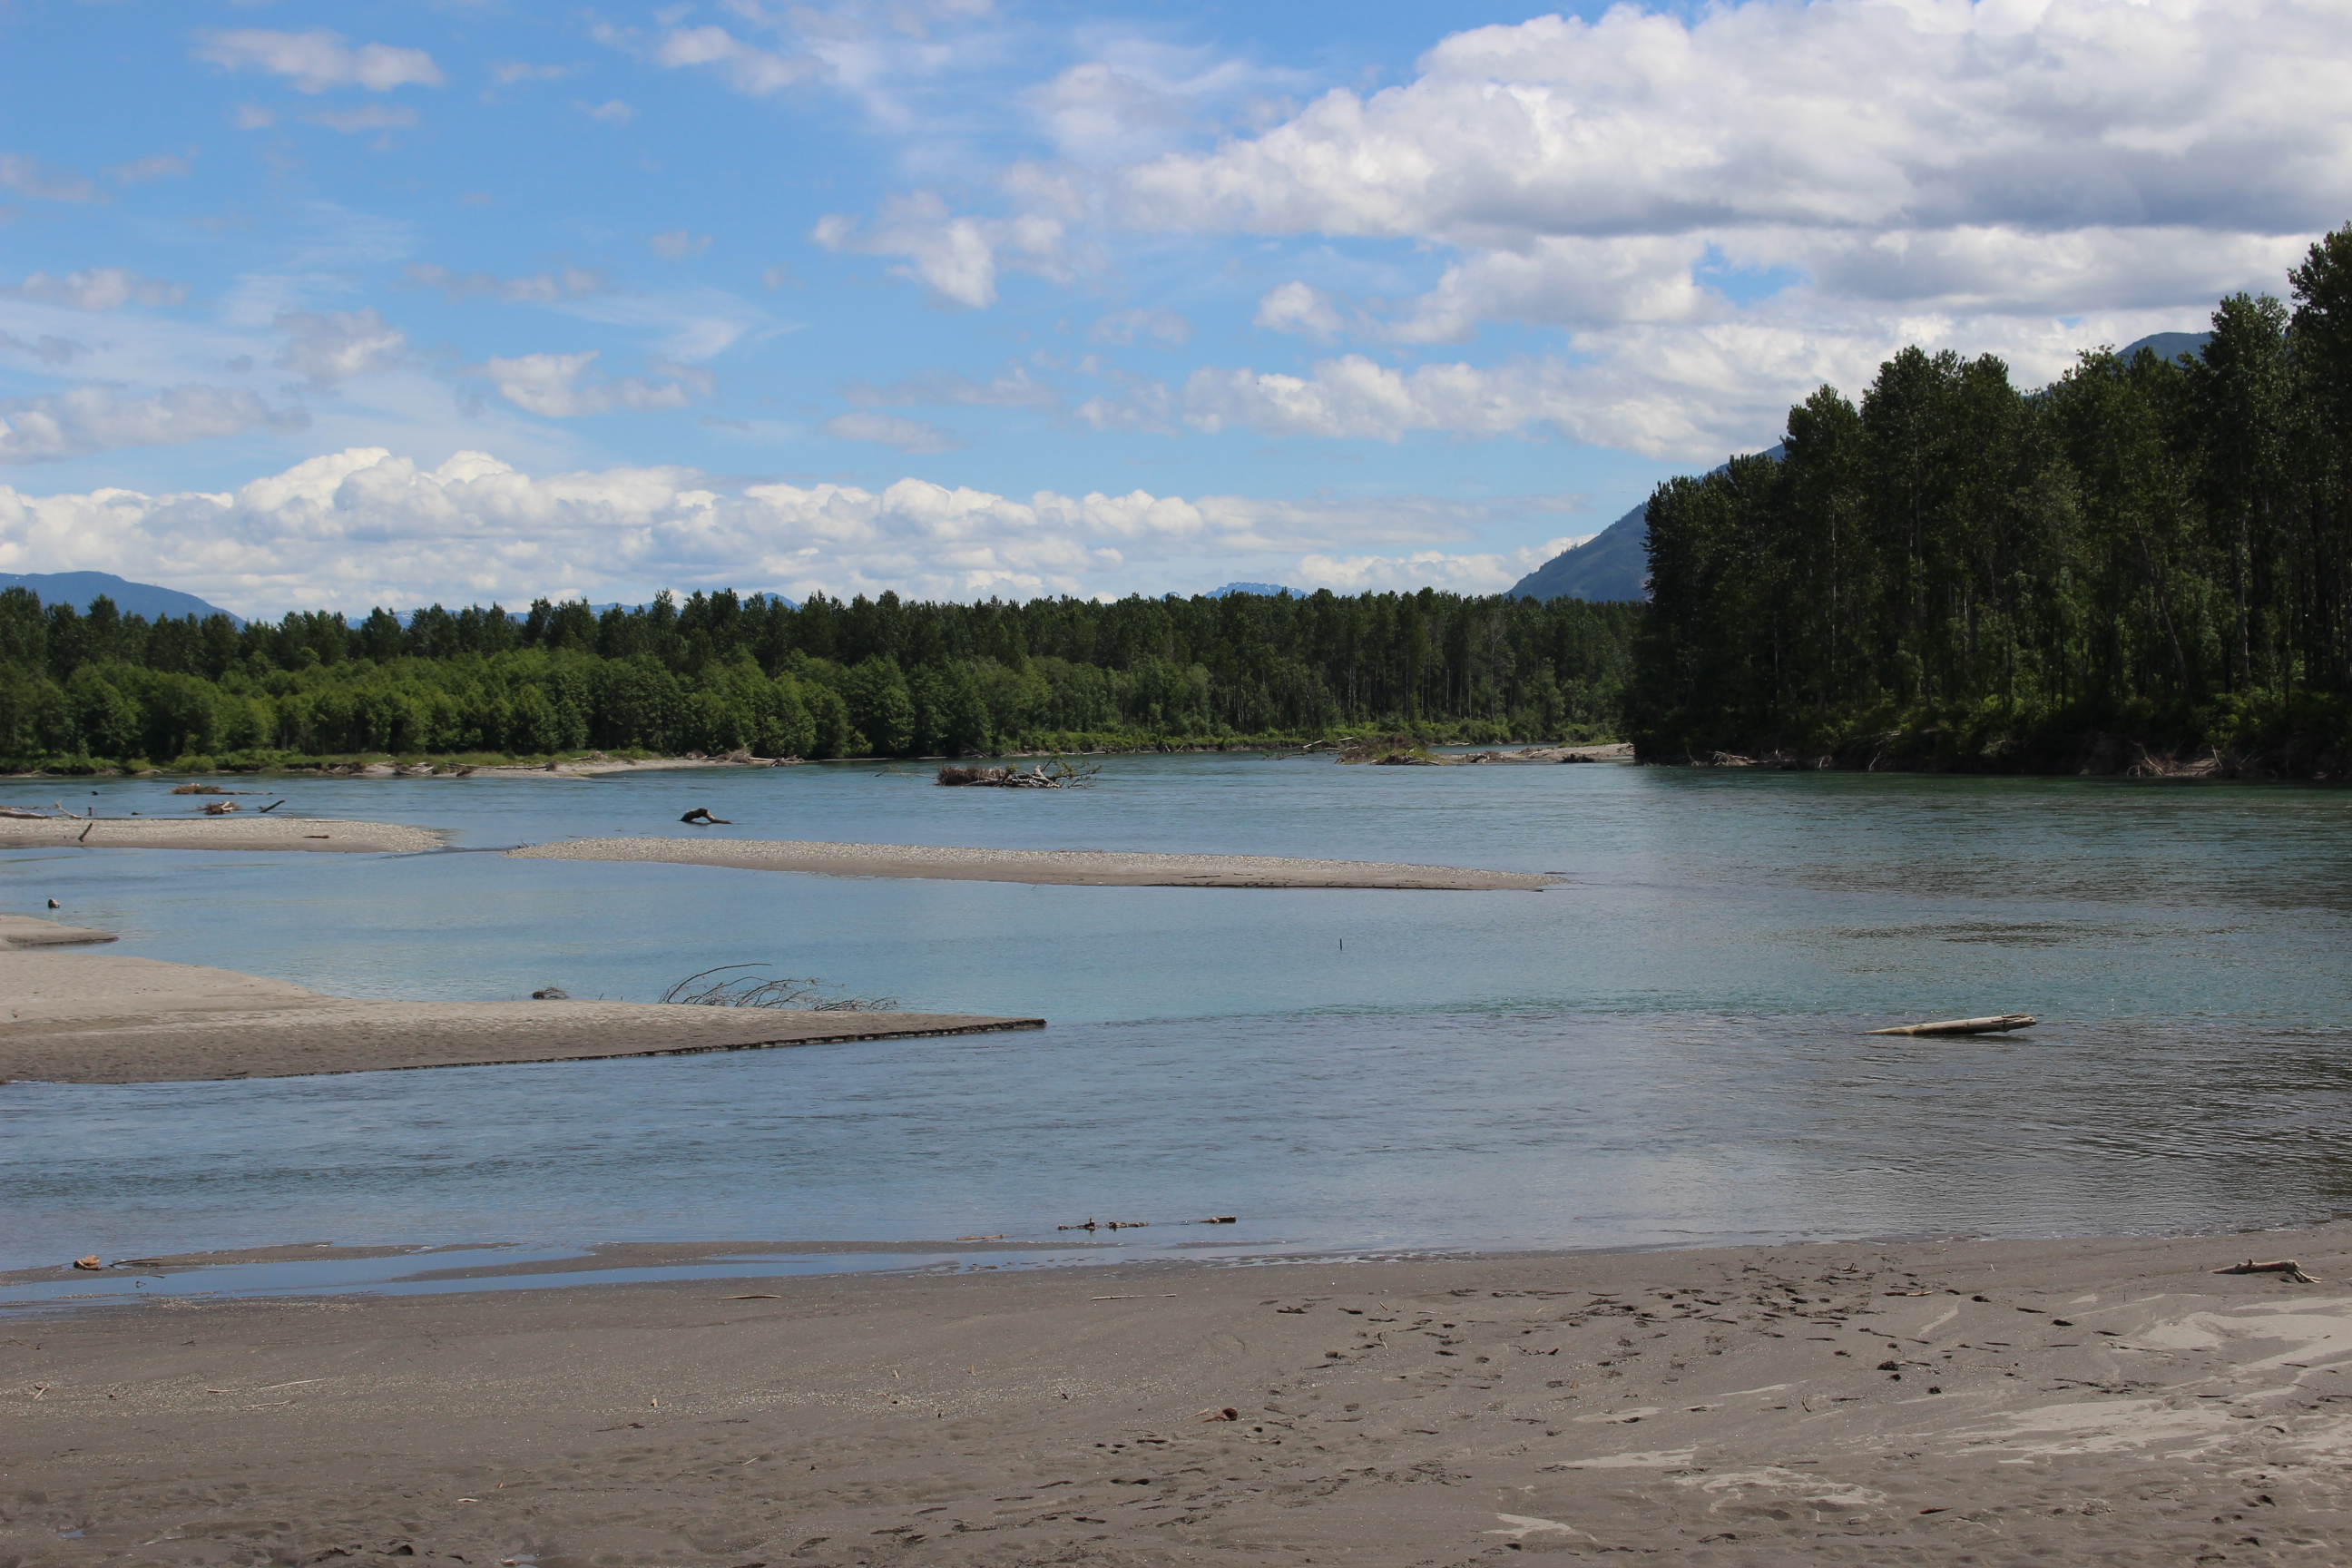 View of the Skagit River looking upstream, June 2018. Photograph credit: NCI staff.